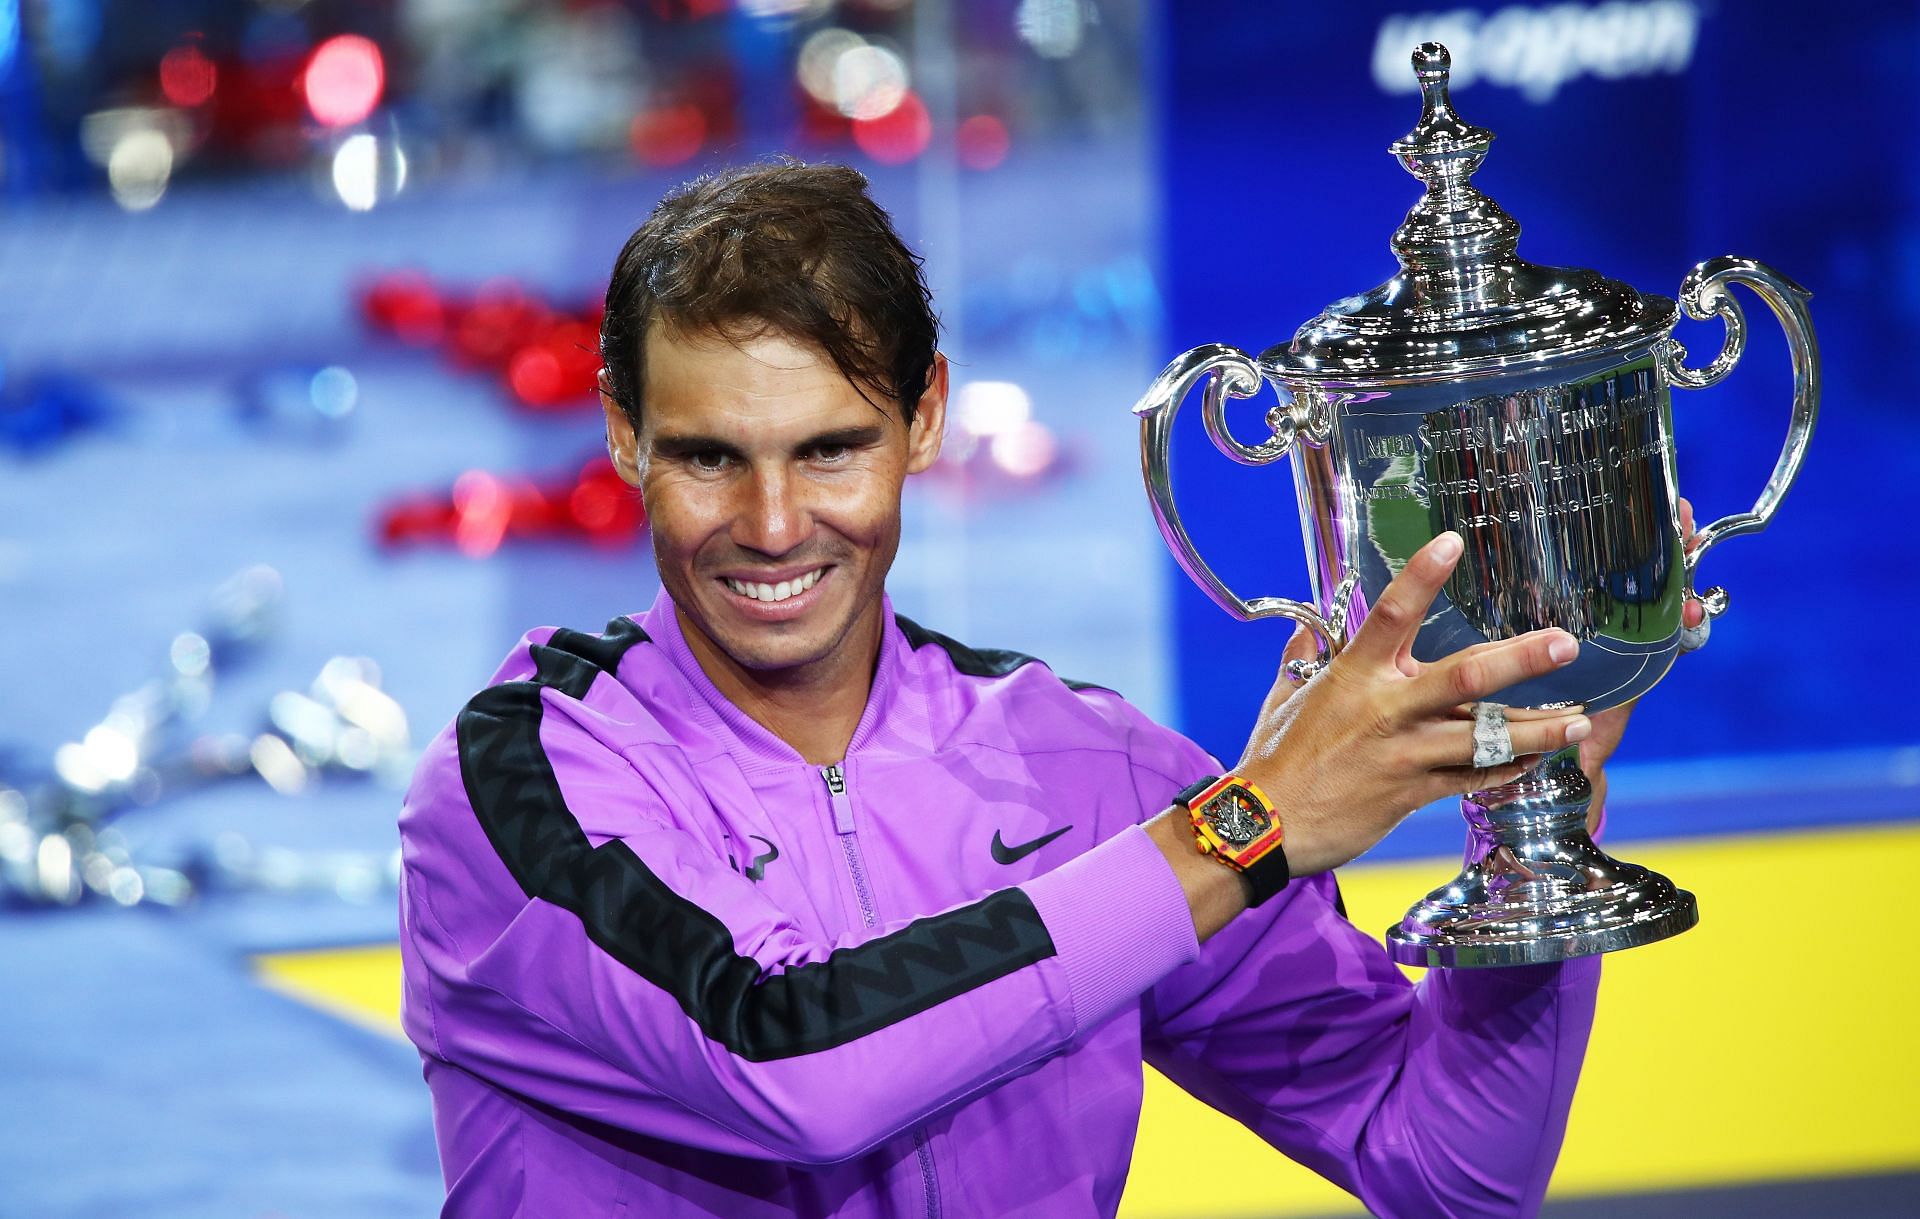 Rafael Nadal won his 19th Grand Slam title and fourth US Open title in New York in 2019